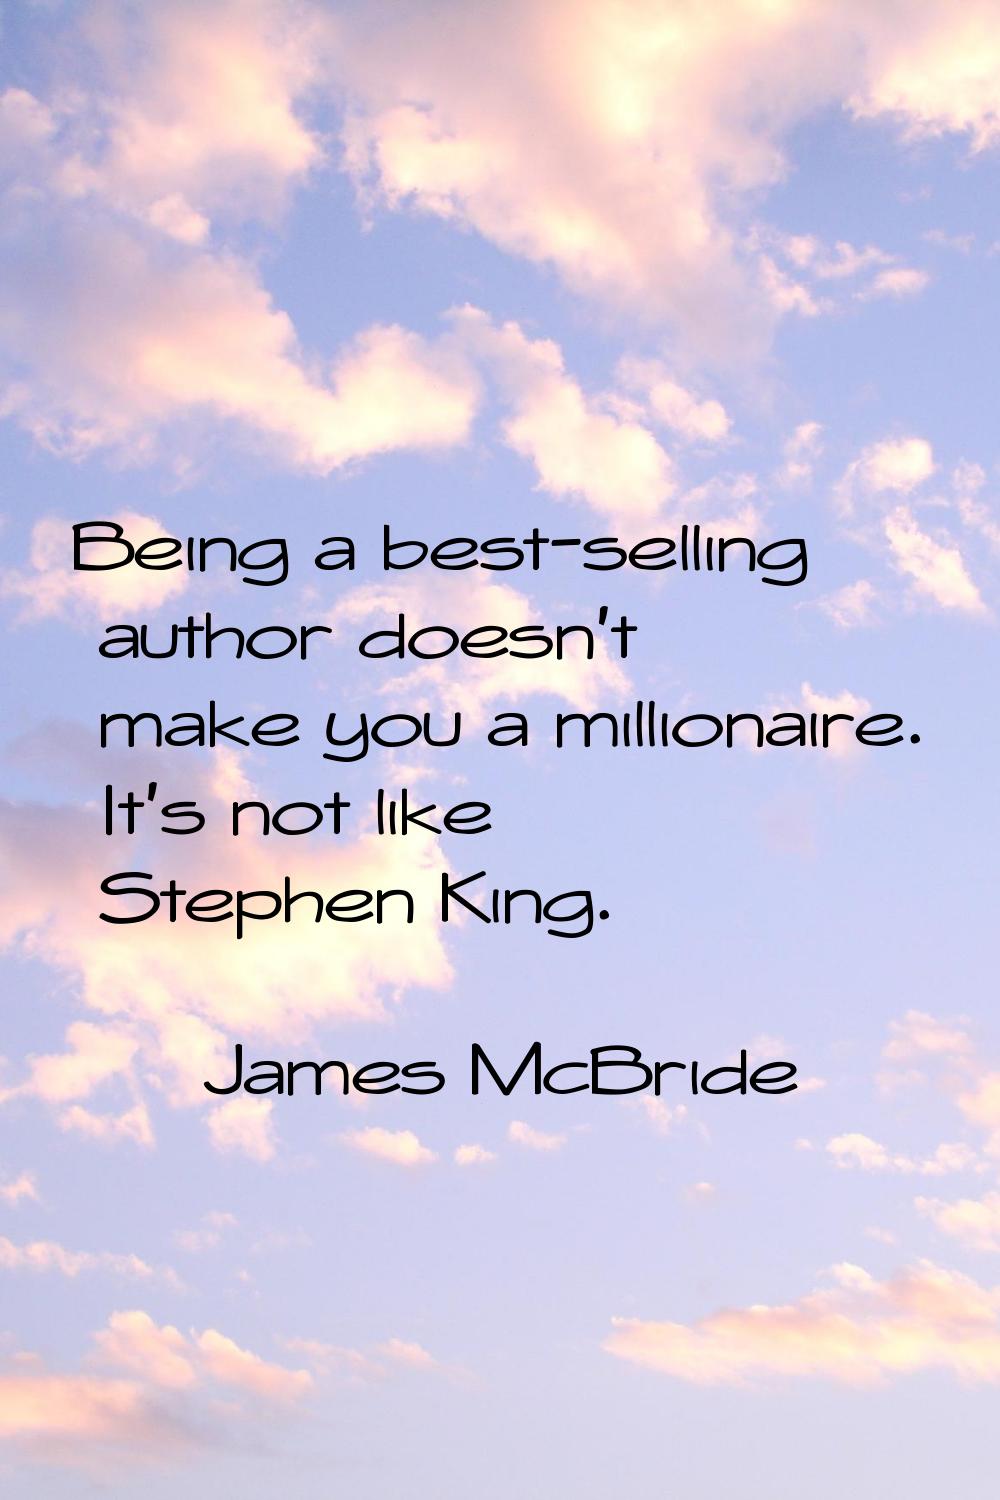 Being a best-selling author doesn't make you a millionaire. It's not like Stephen King.